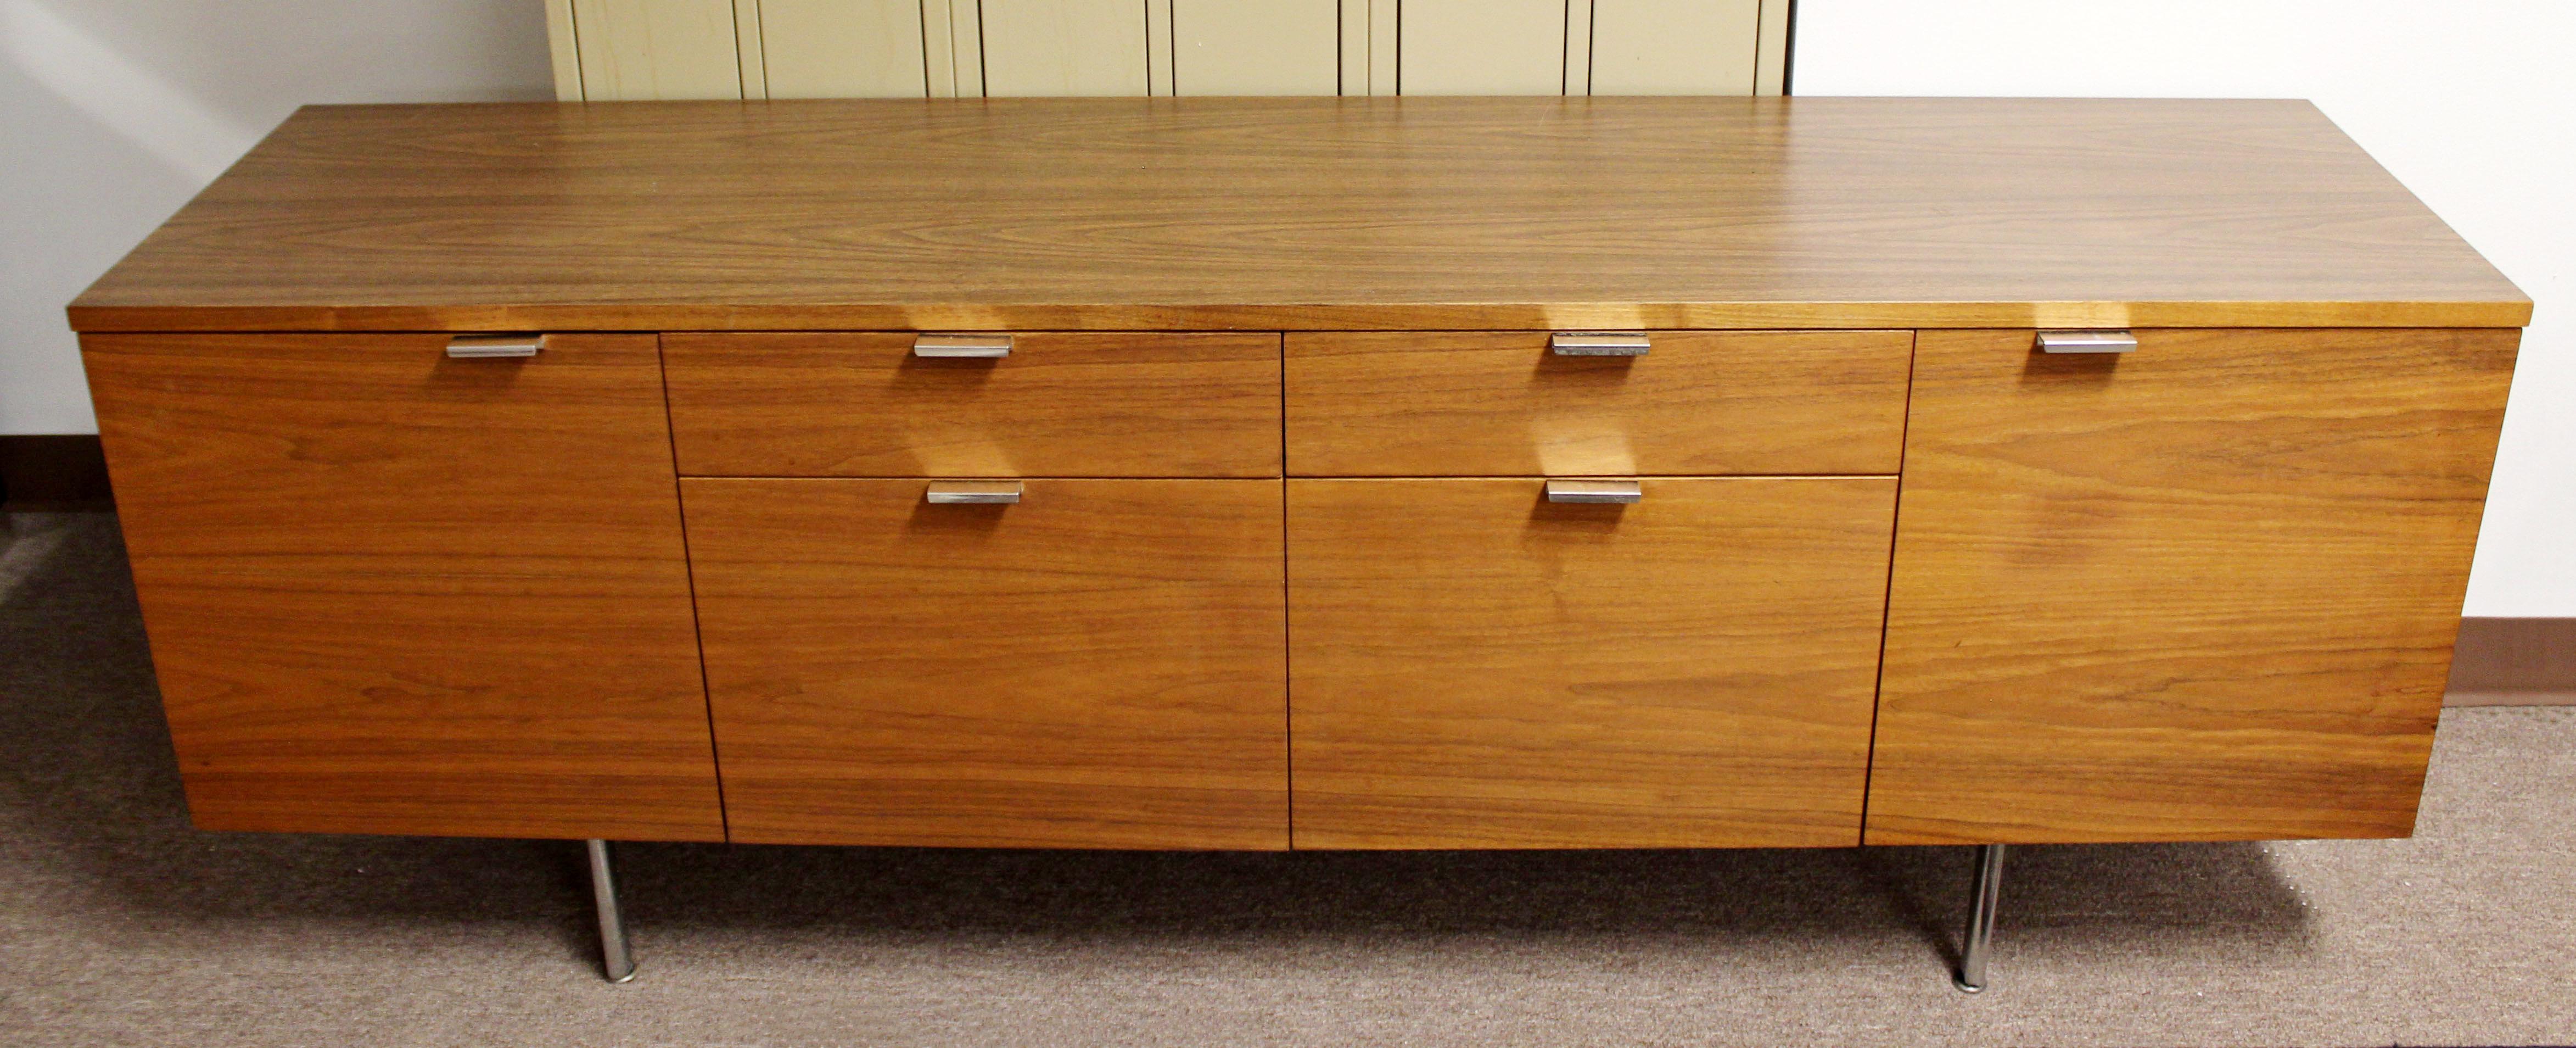 For your consideration is a wonderful, walnut credenza, with four drawers and two shelves, by George Nelson for Herman Miller, circa the 1950s. In excellent condition. The dimensions are 74